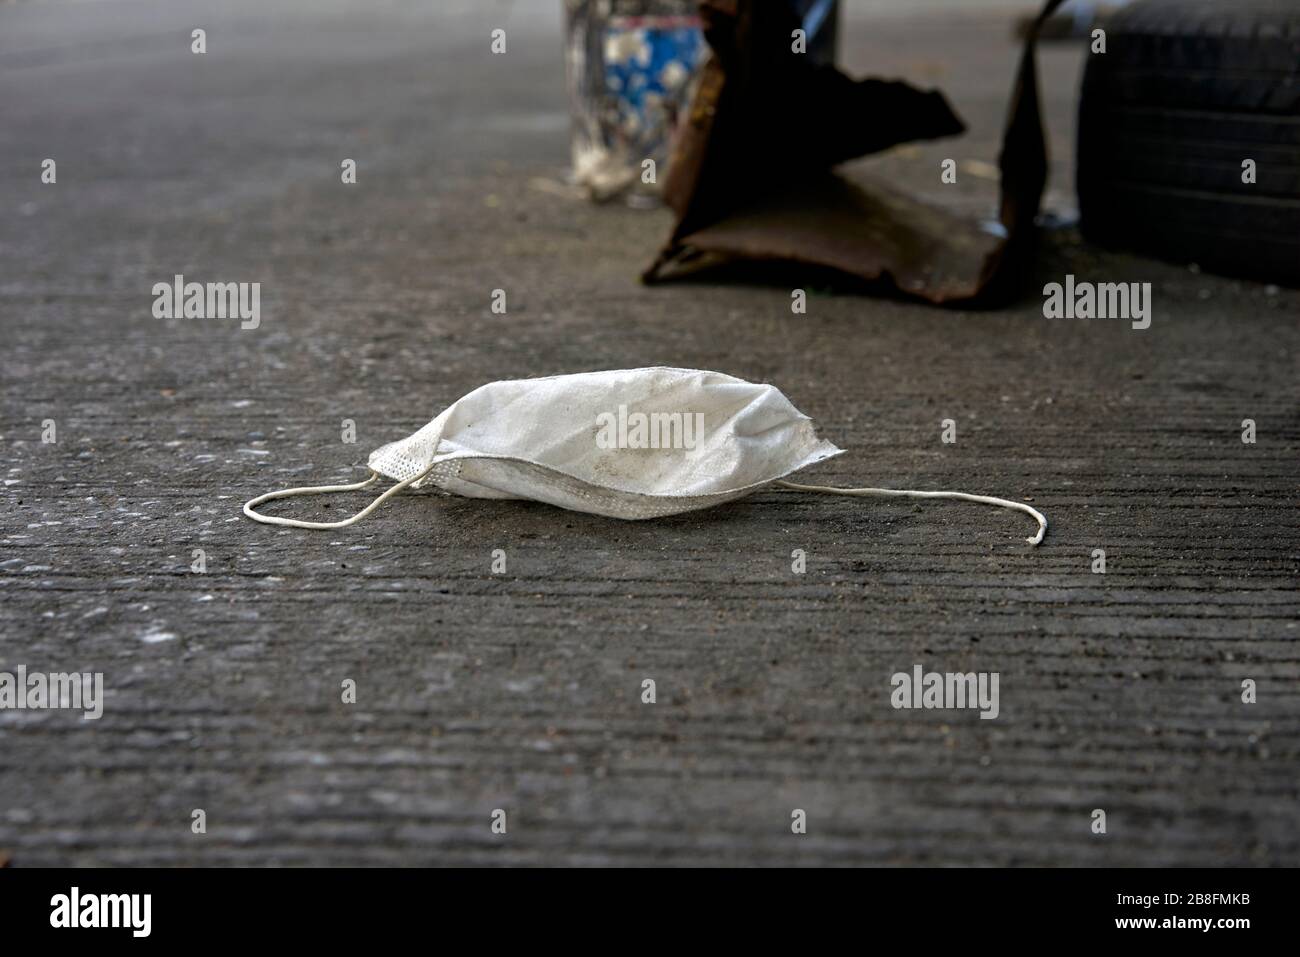 Covid-19 mask. Concept of the end in sight of Coronavirus 2020 pandemic with a discarded facemask on the street Stock Photo